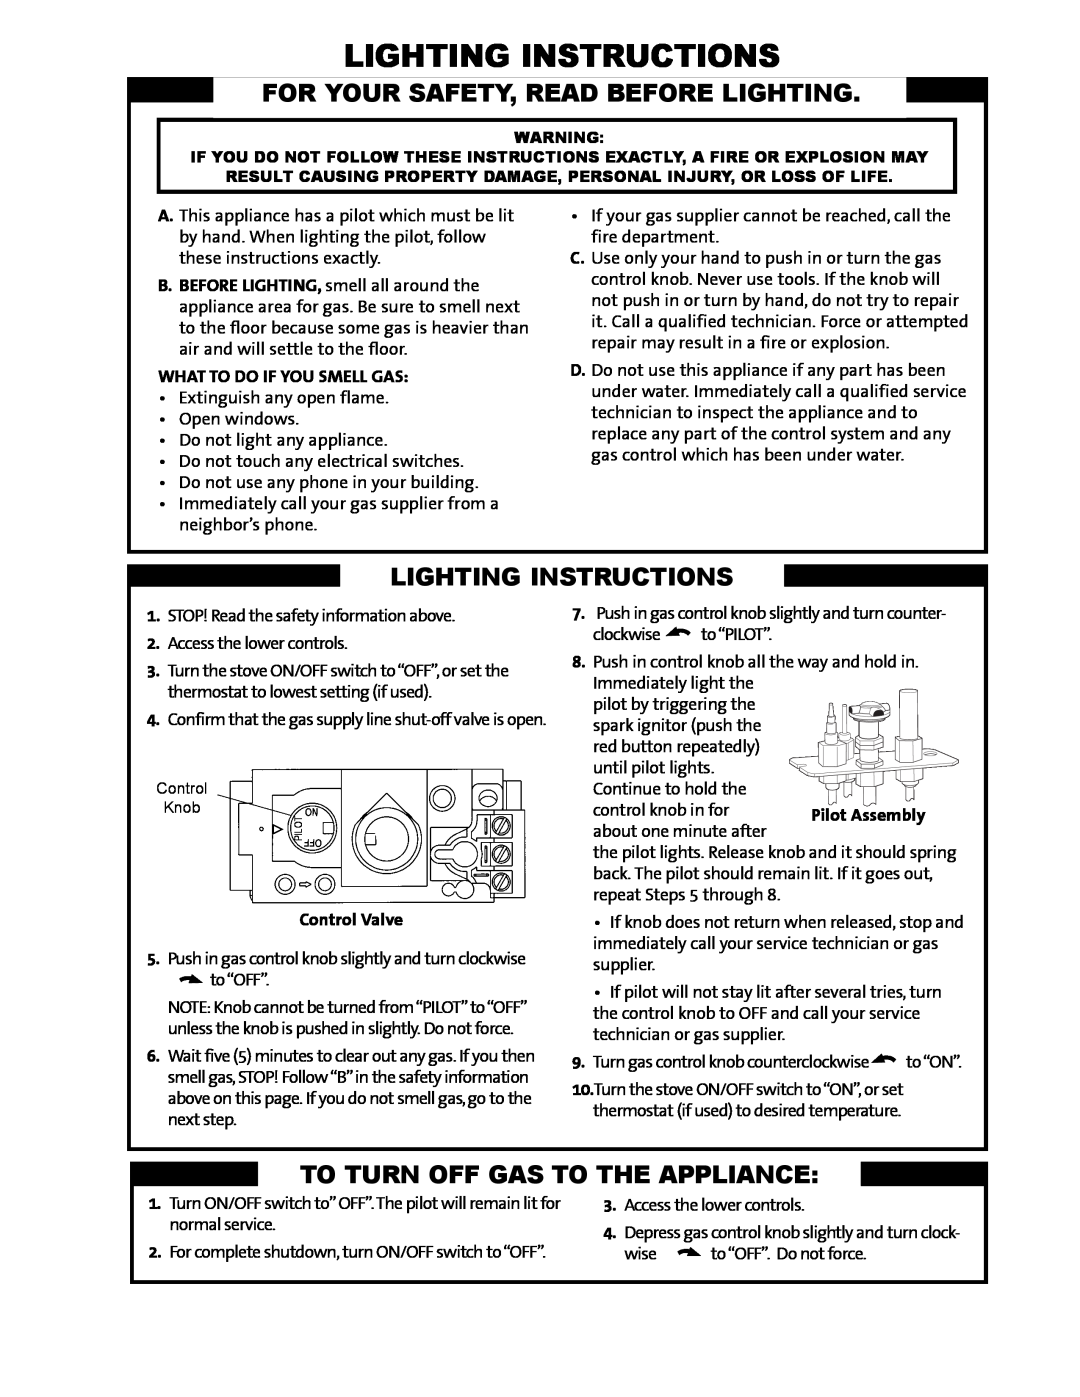 Jotul GI 425 DV manual Lighting Instructions, For Your Safety, Read Before Lighting, To Turn Off Gas To The Appliance 